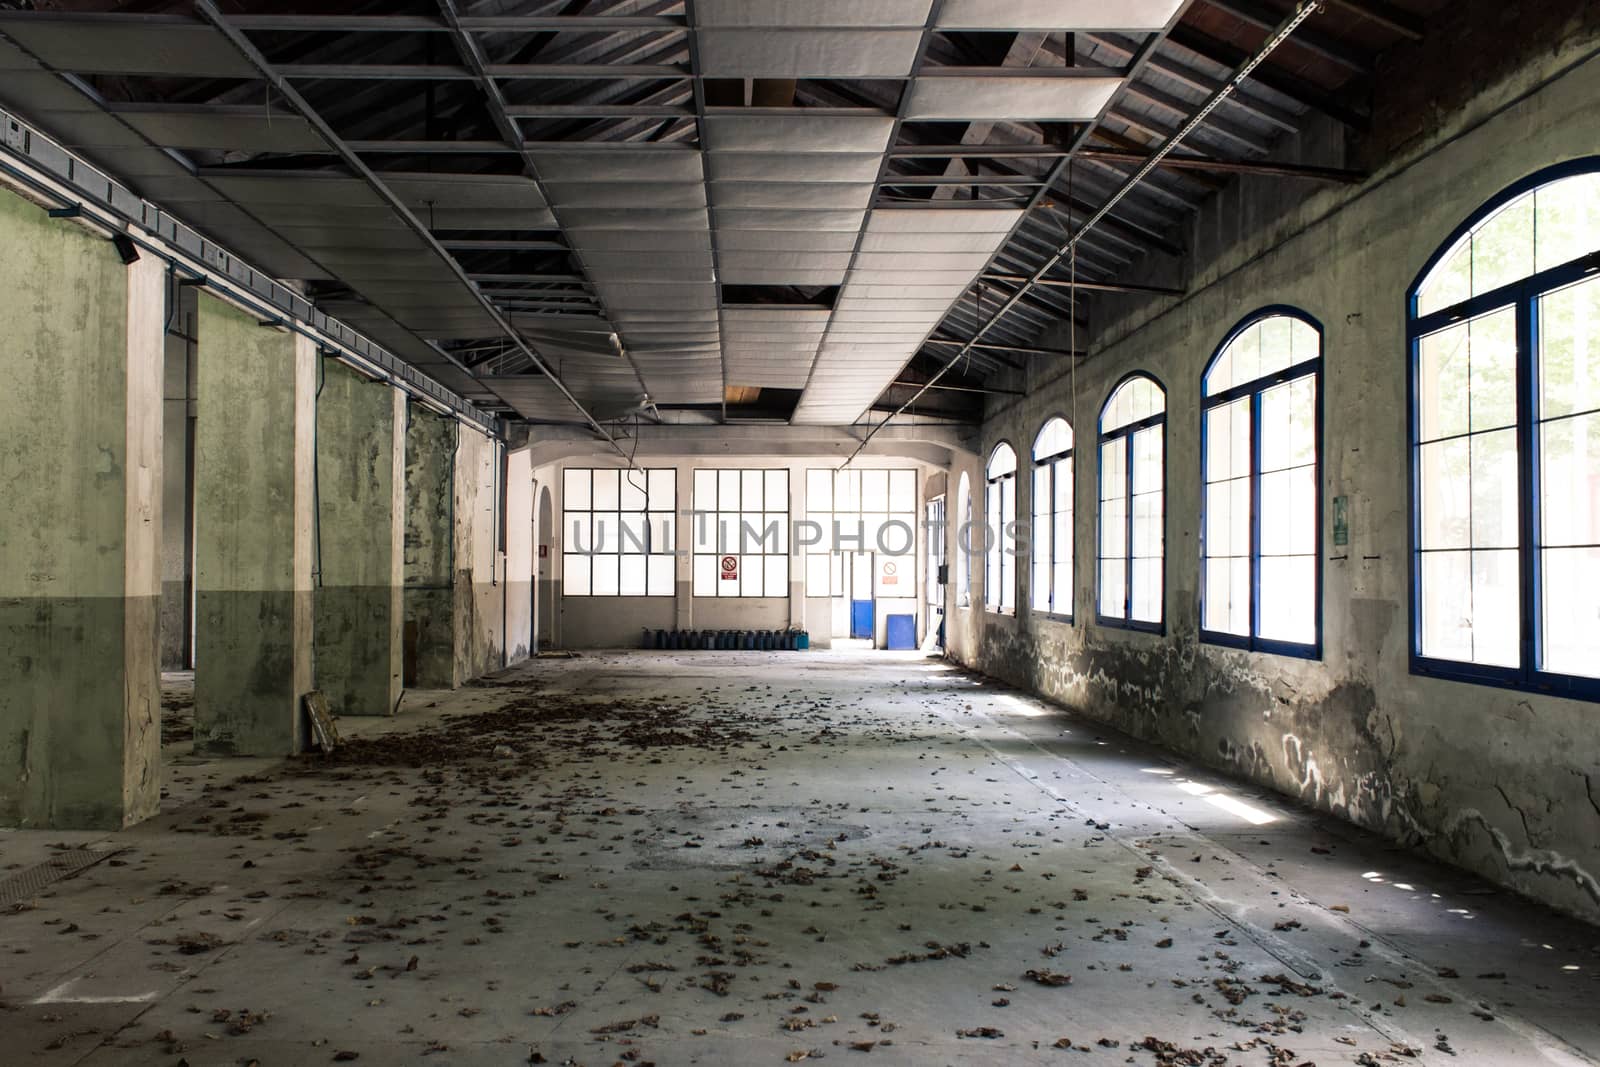 Interior of an abandoned factory by goghy73